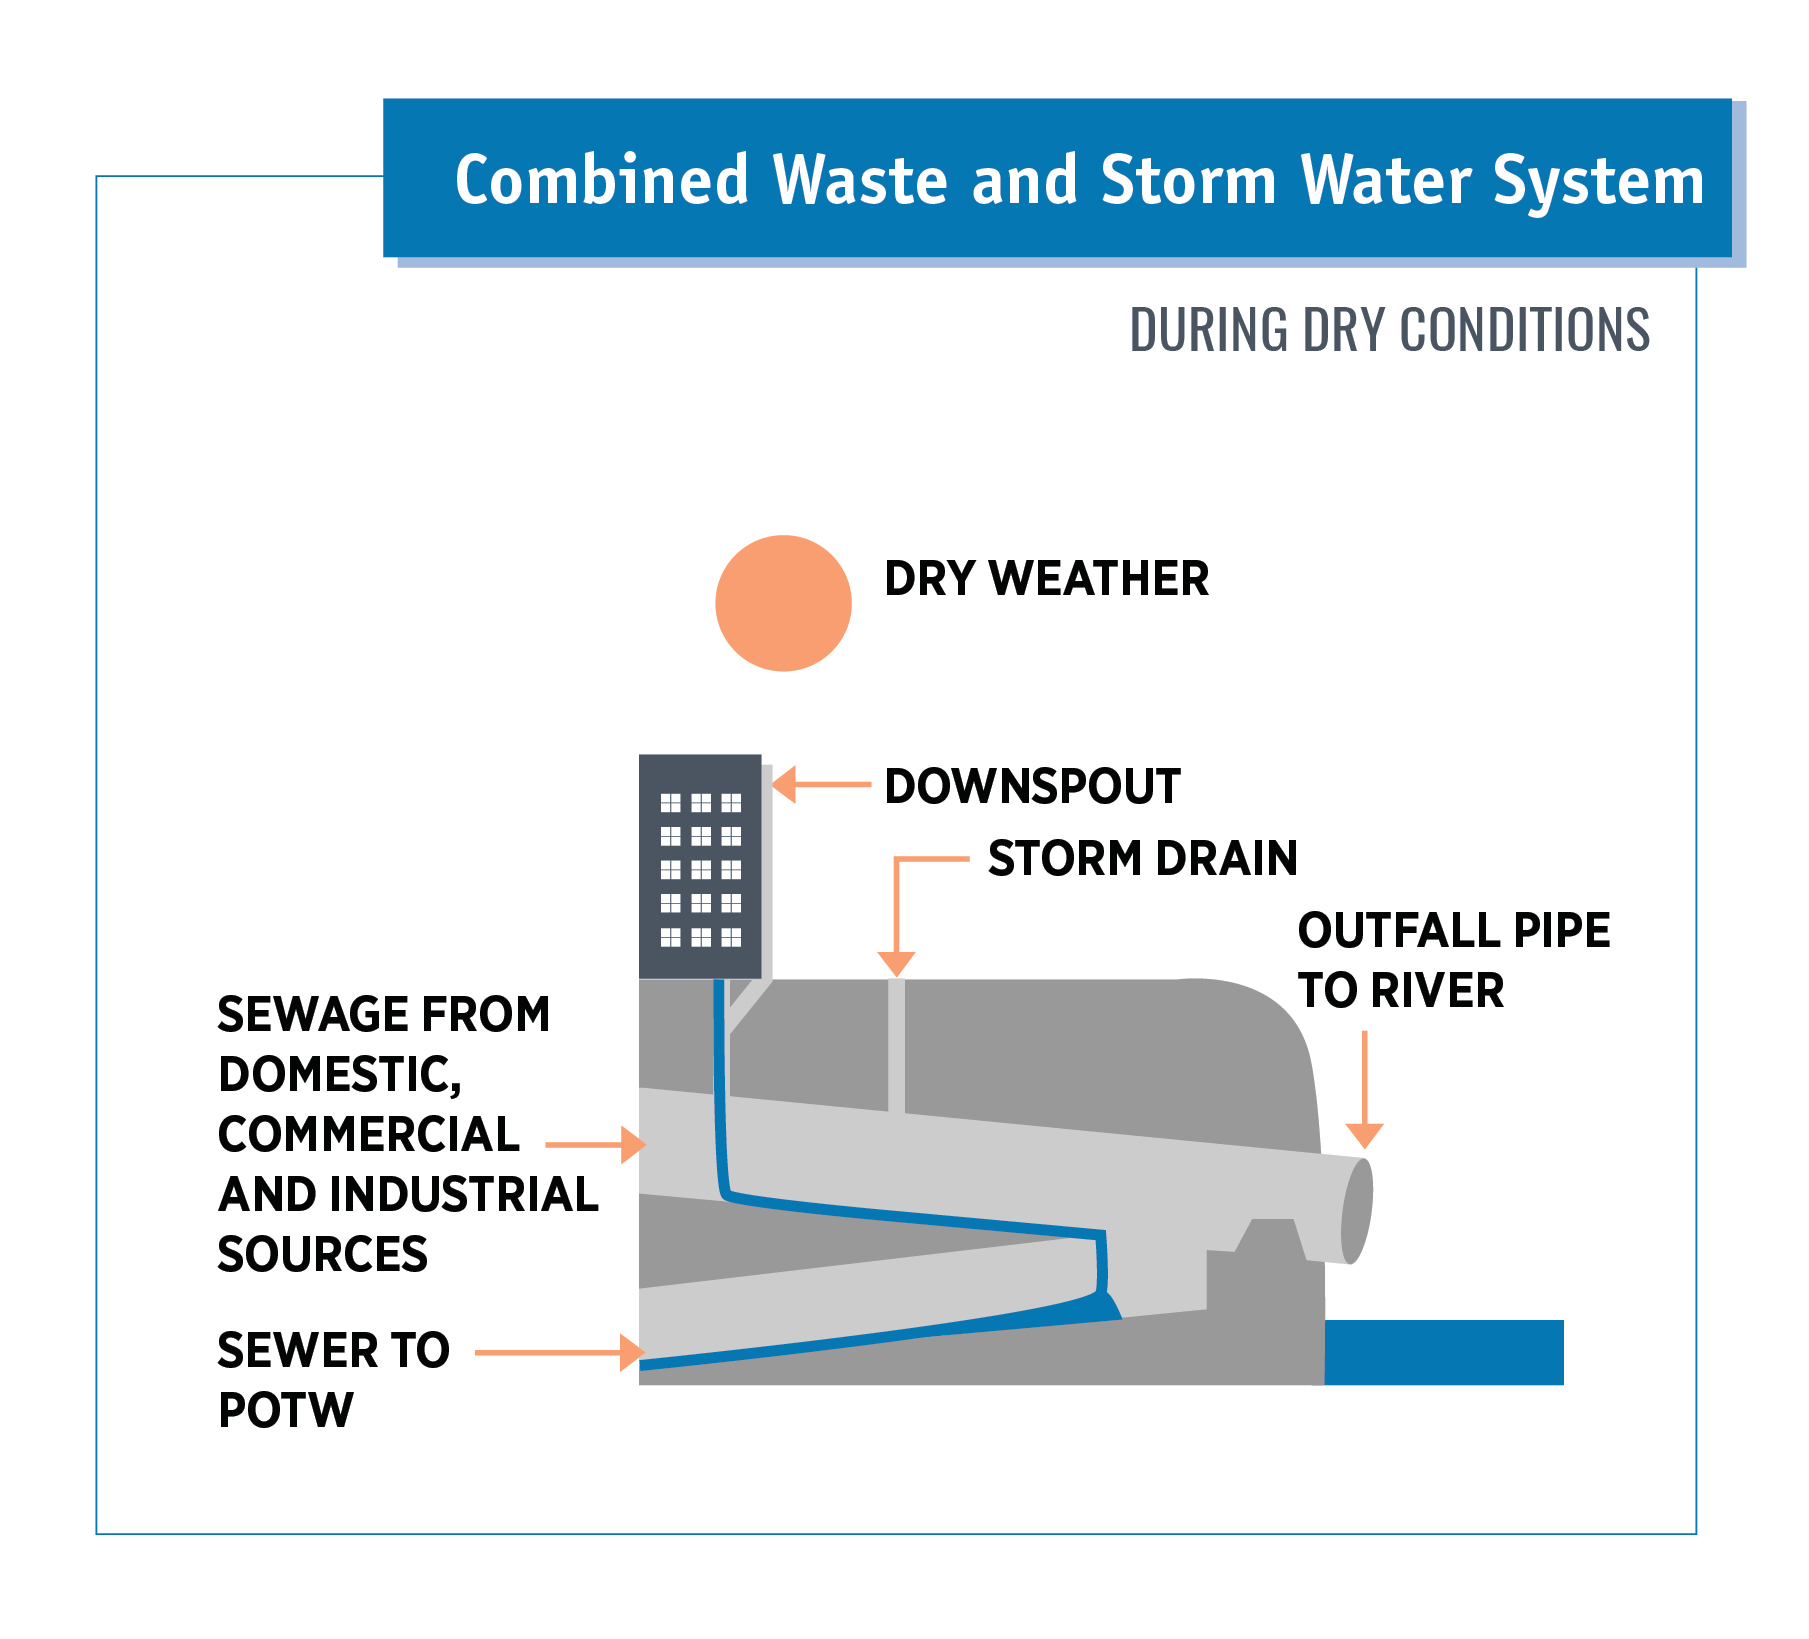 Combined Waste and Storm Water System (Dry)